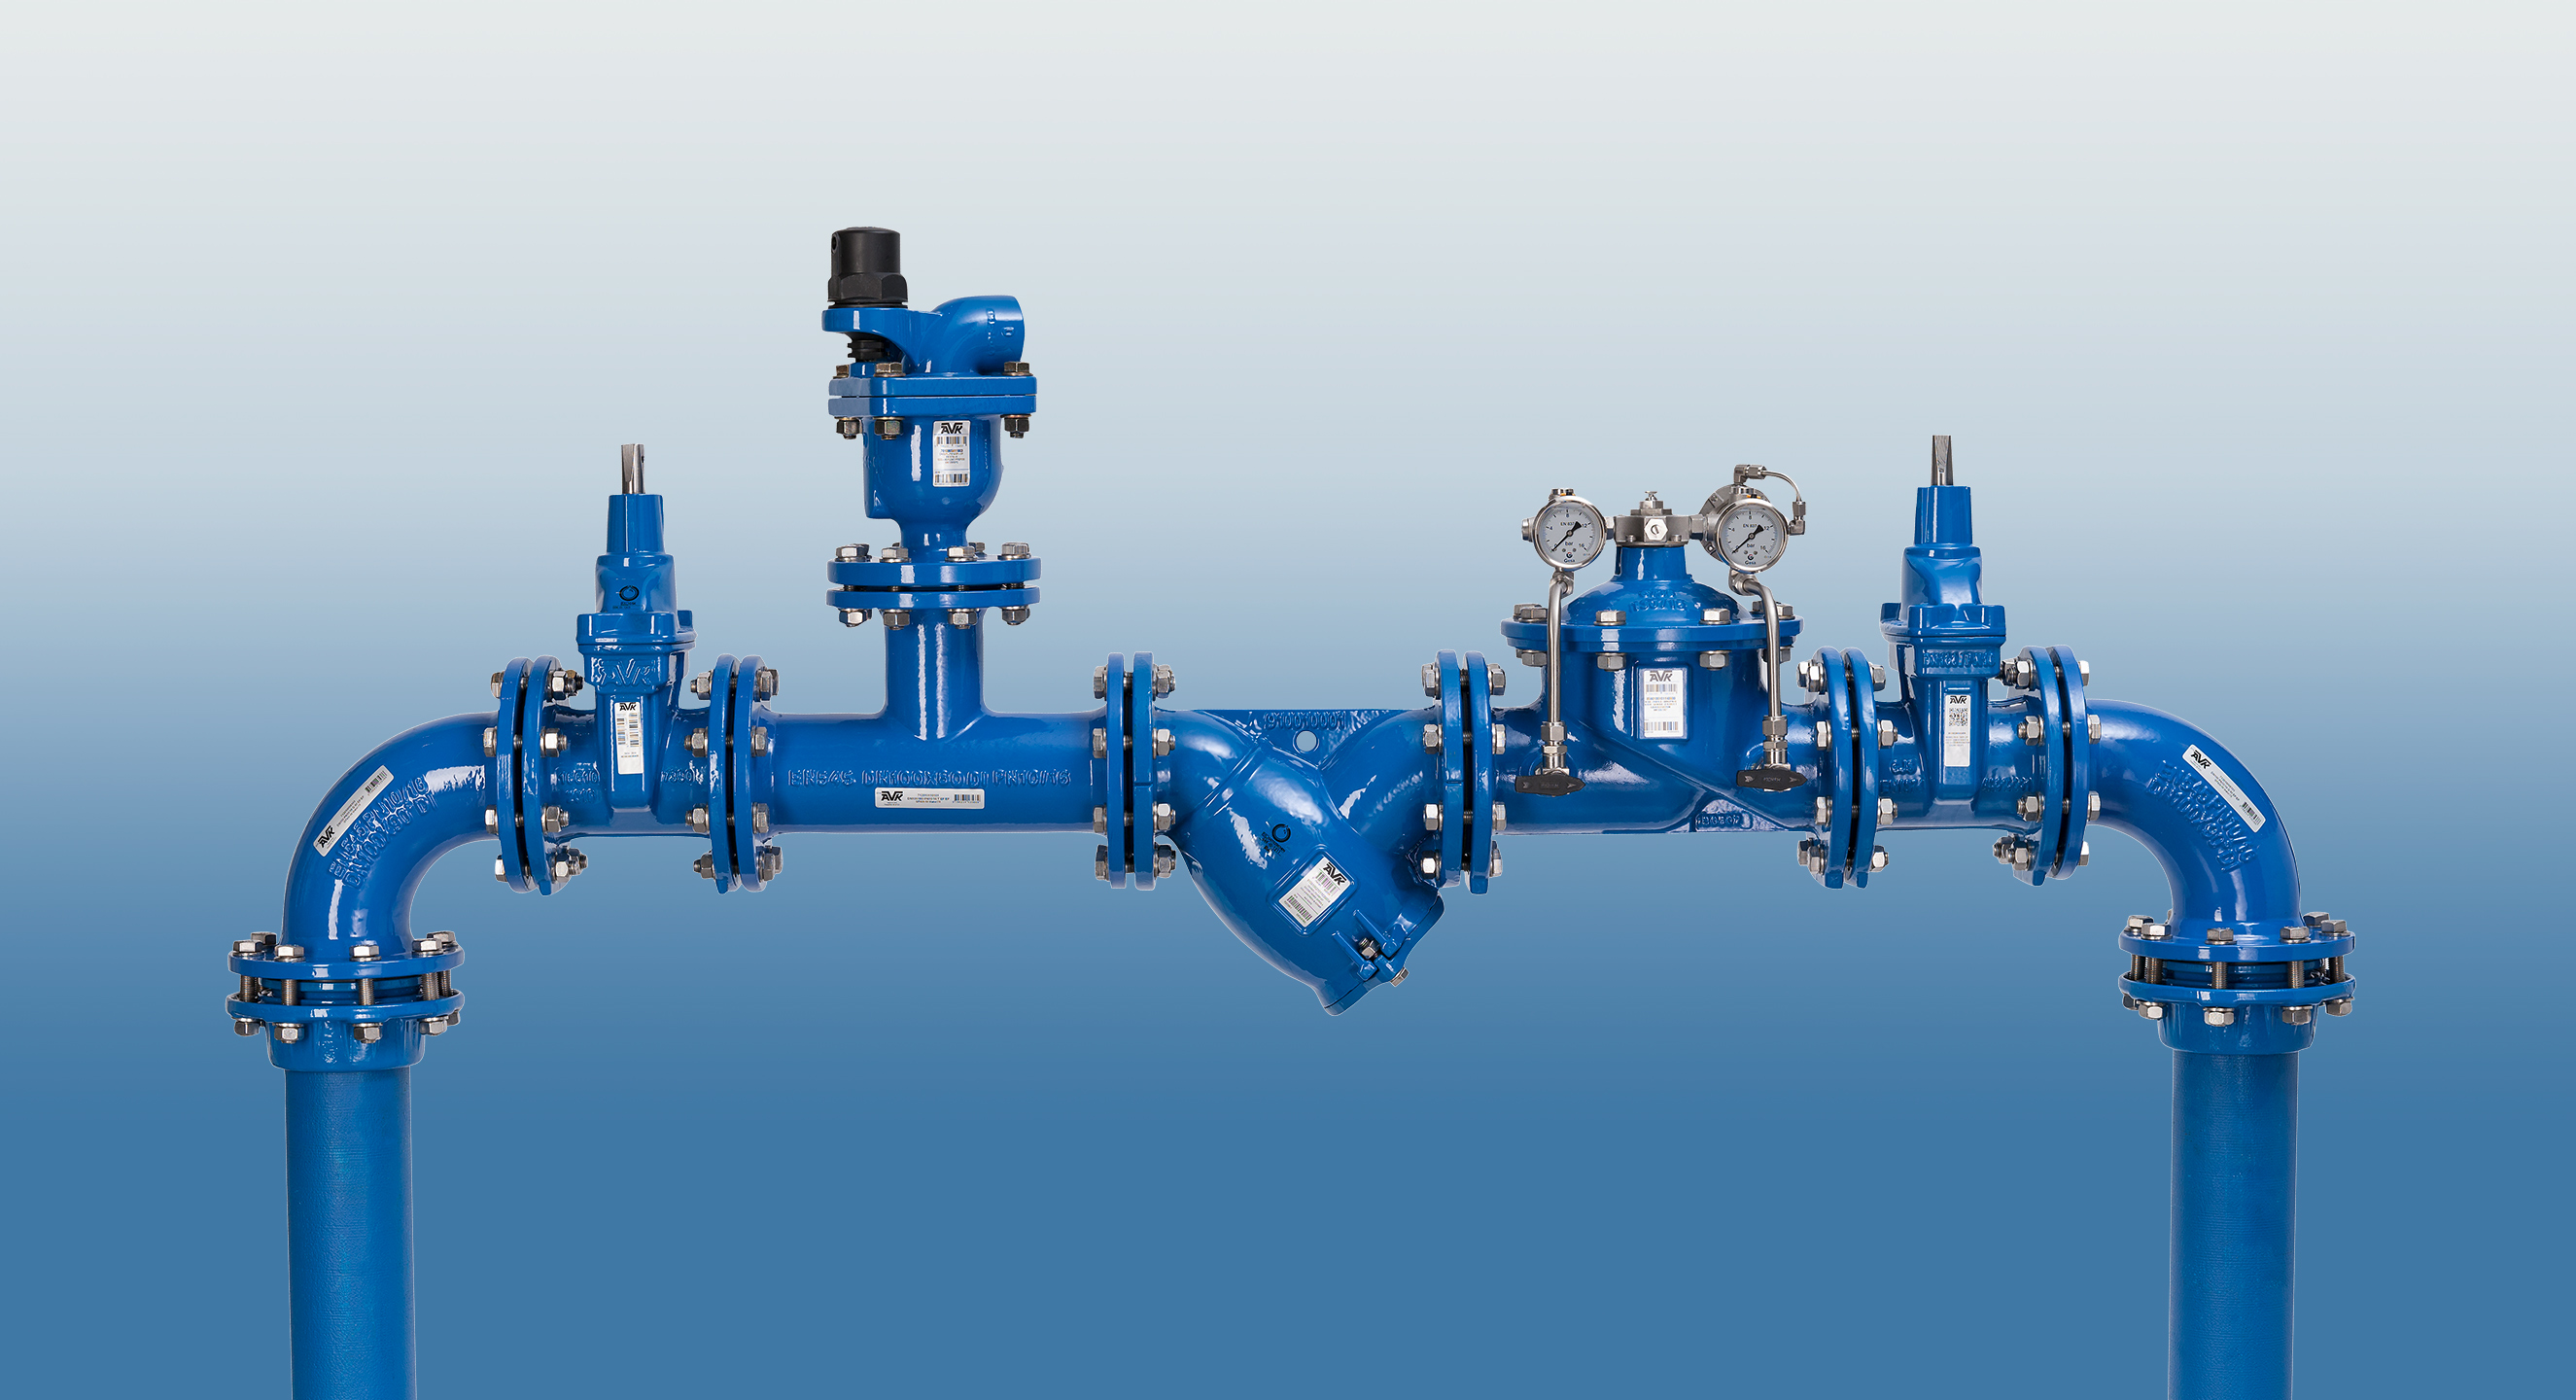 Product selection recommendations for installation of control valves